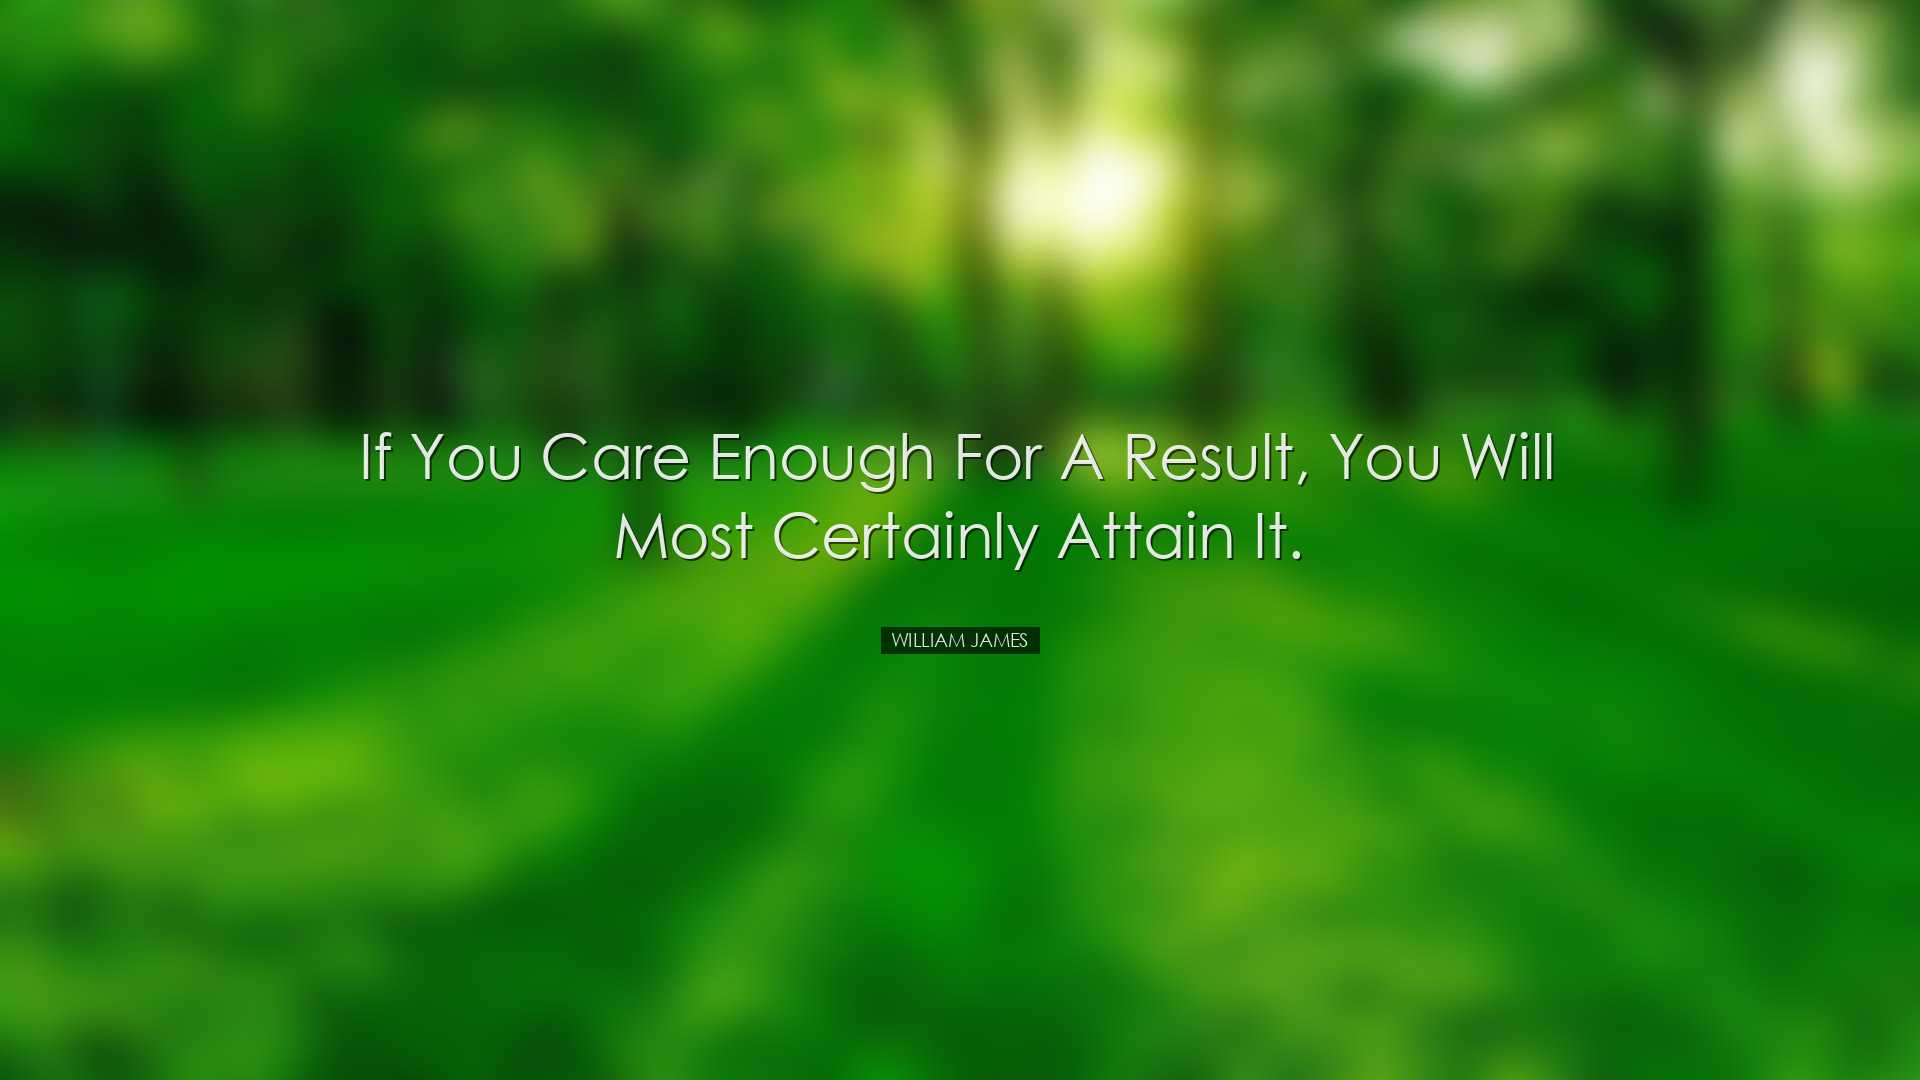 If you care enough for a result, you will most certainly attain it